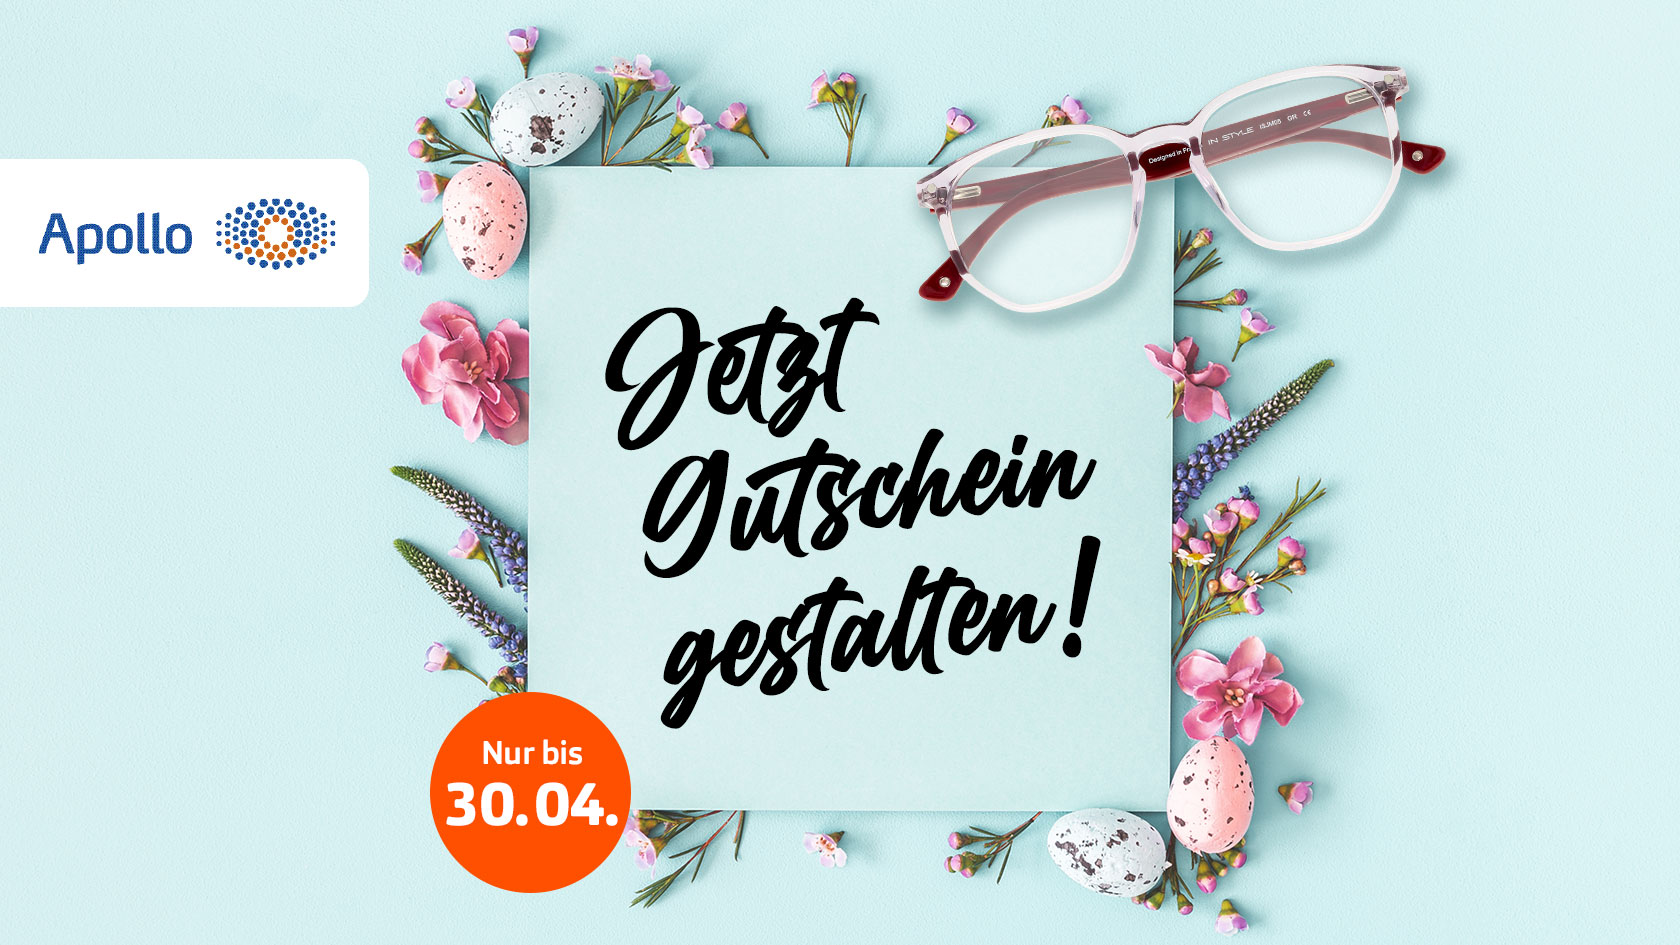 Voucher in front of Easter arrangement with glasses